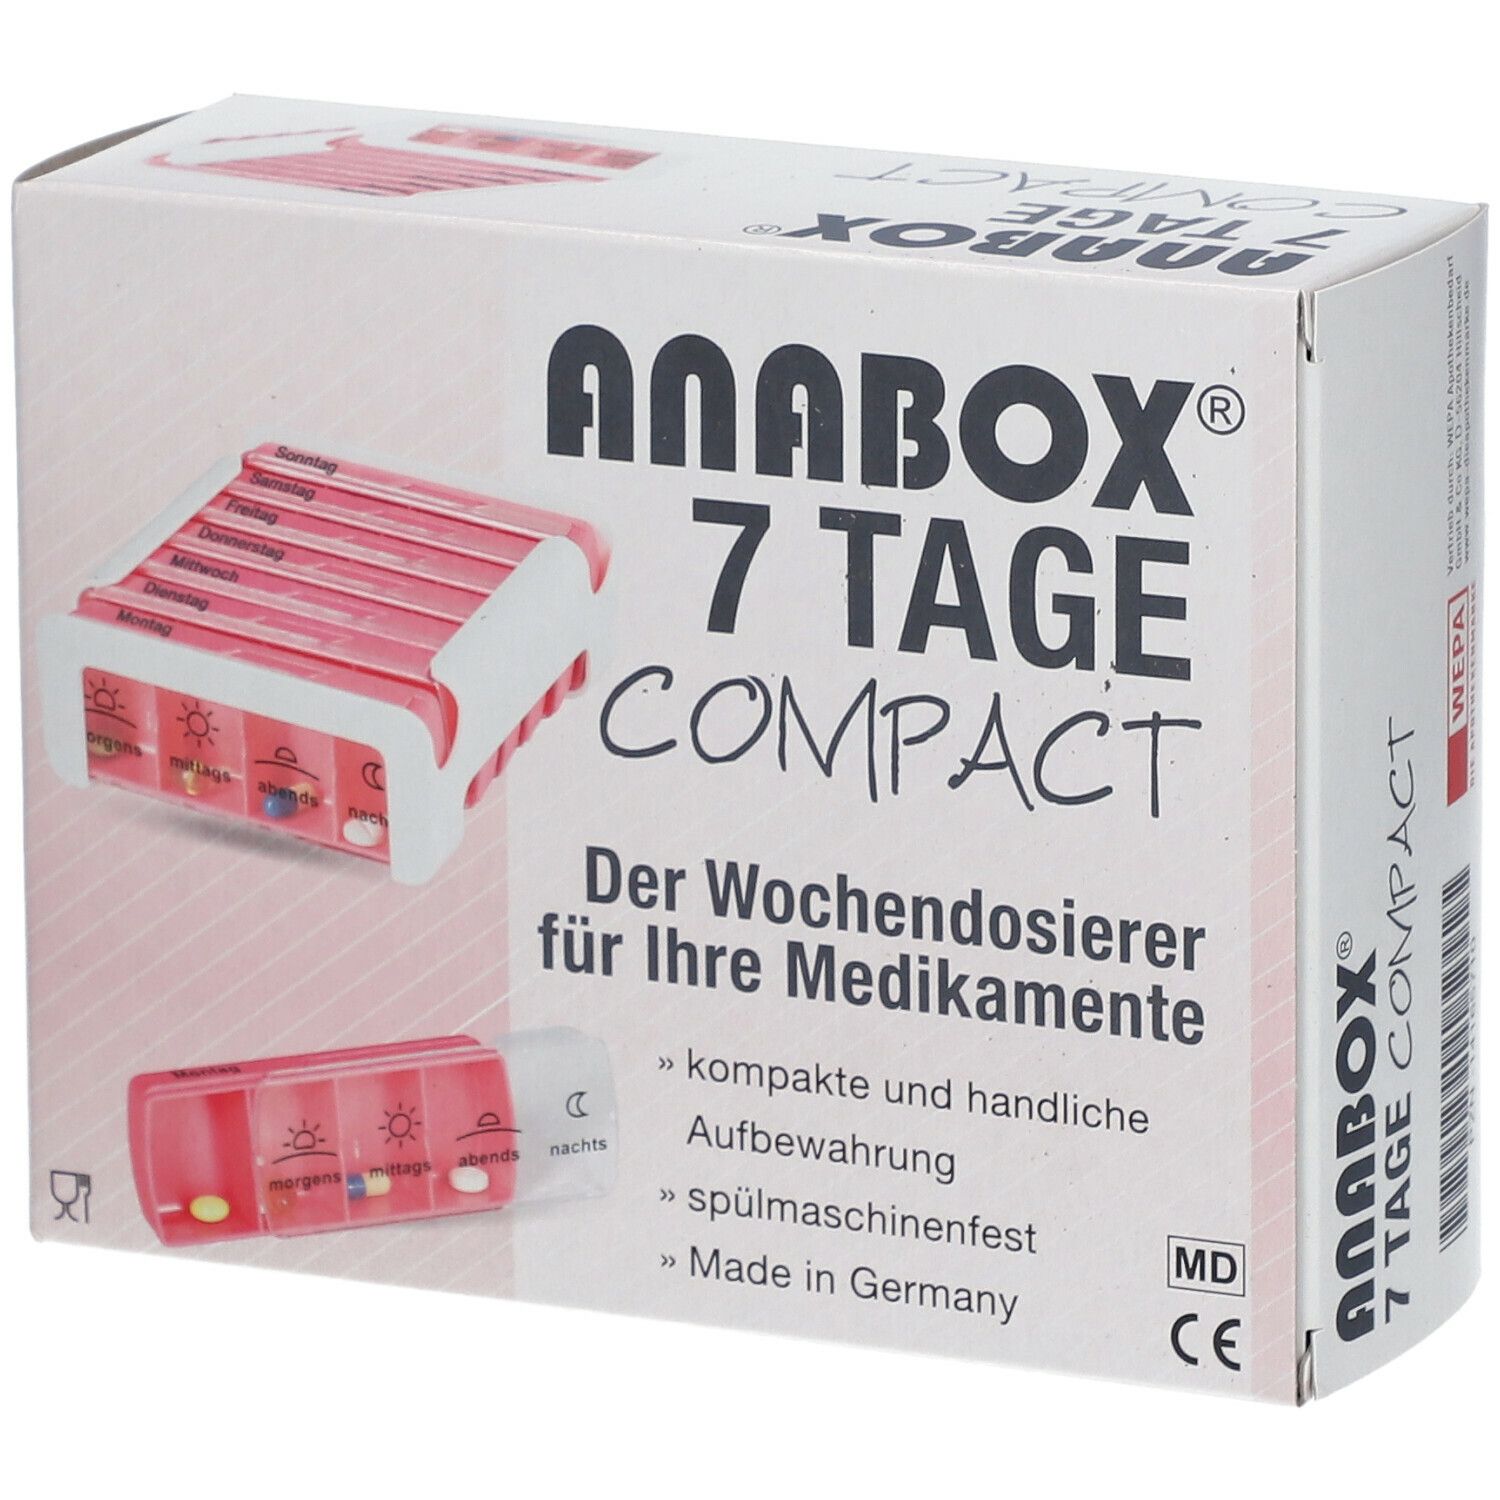 ANABOX® 7 Tage Compact pink/weiß